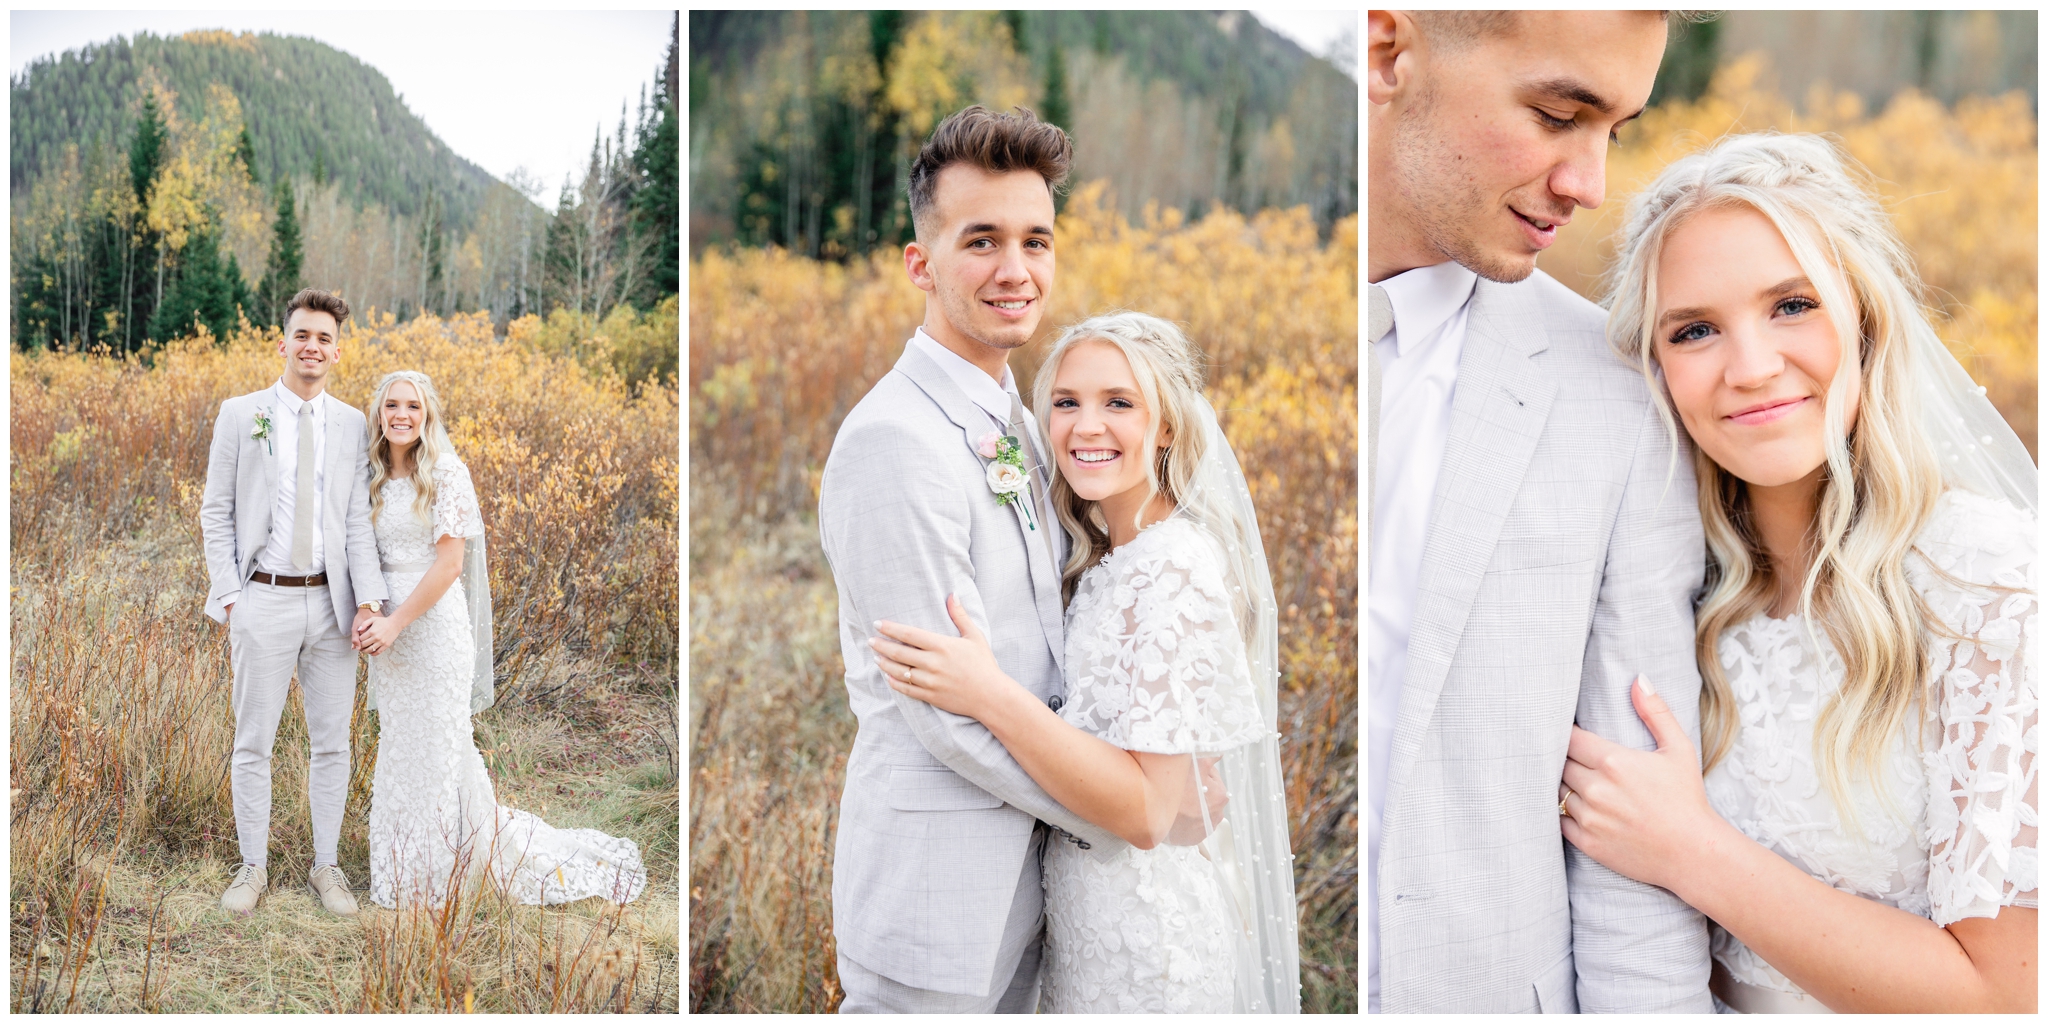 Bride and groom photos on their wedding day in Utah